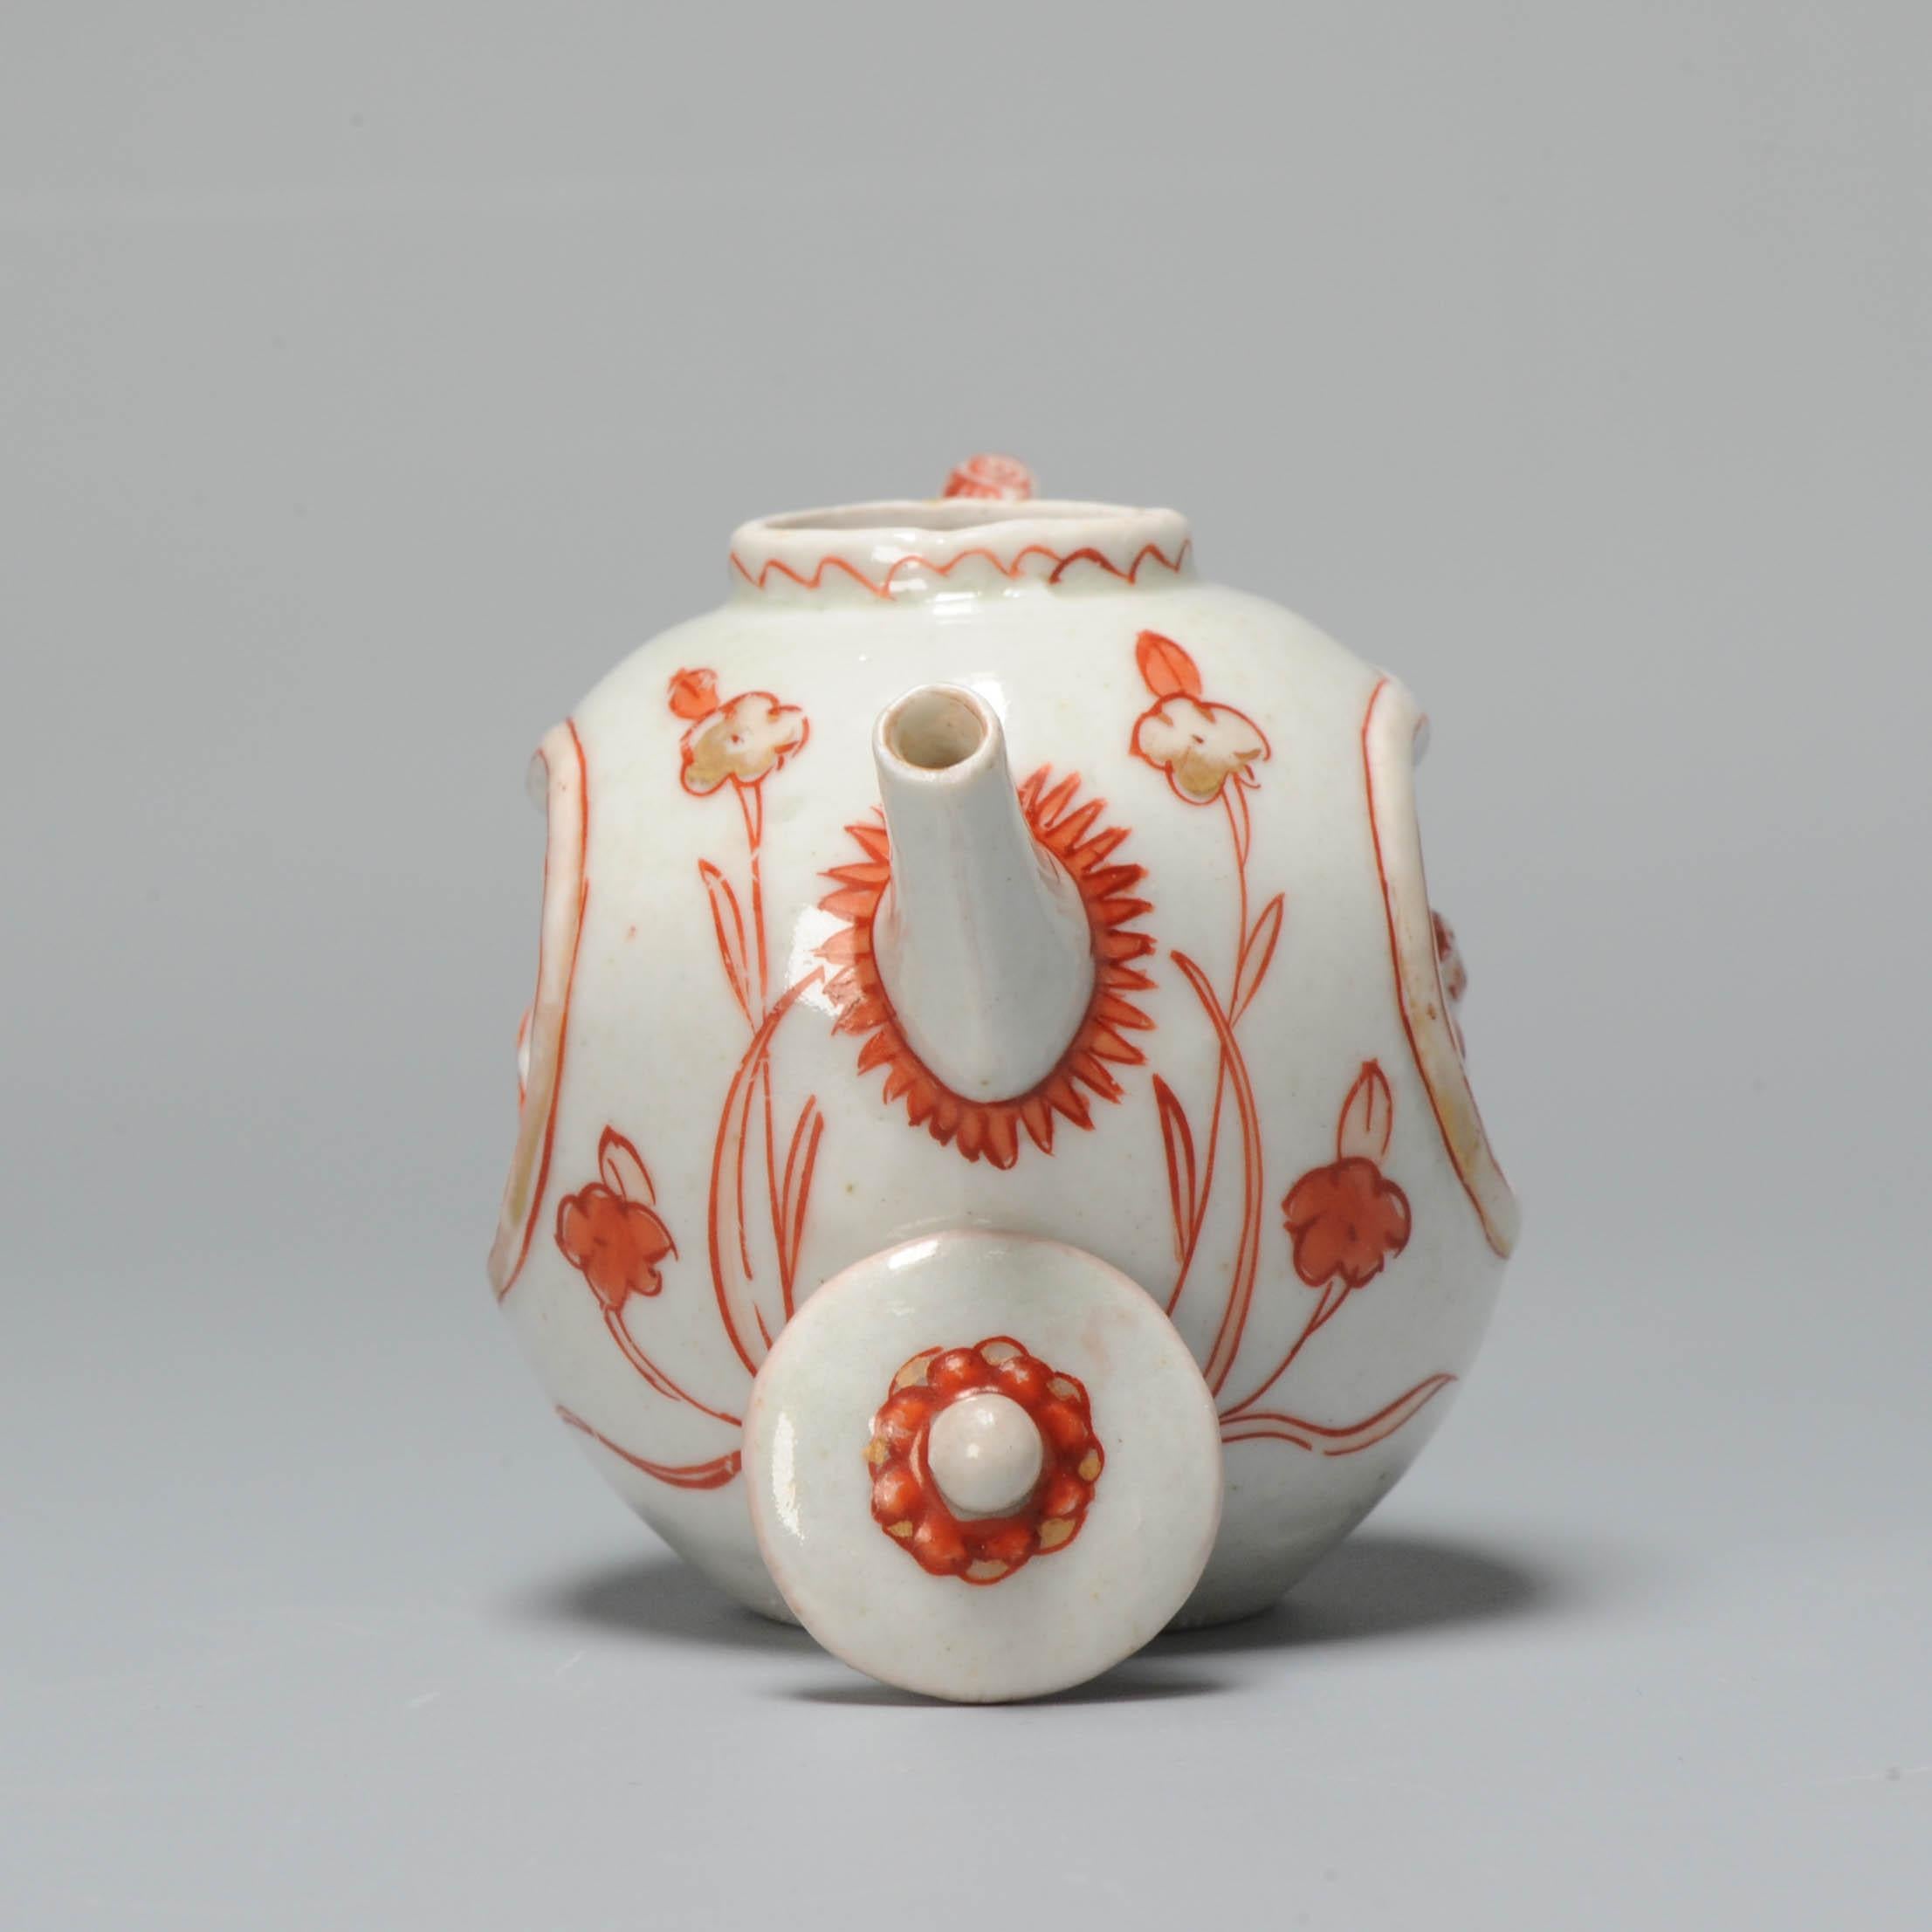 Small teapot, square, rounded body on flat unglazed base. Curved handle and a short straight spout. Small upright mouthrim, flat lid with round knob. Imari decorated in iron-red and gold on the sides with flowering plants and grasses and two deeply